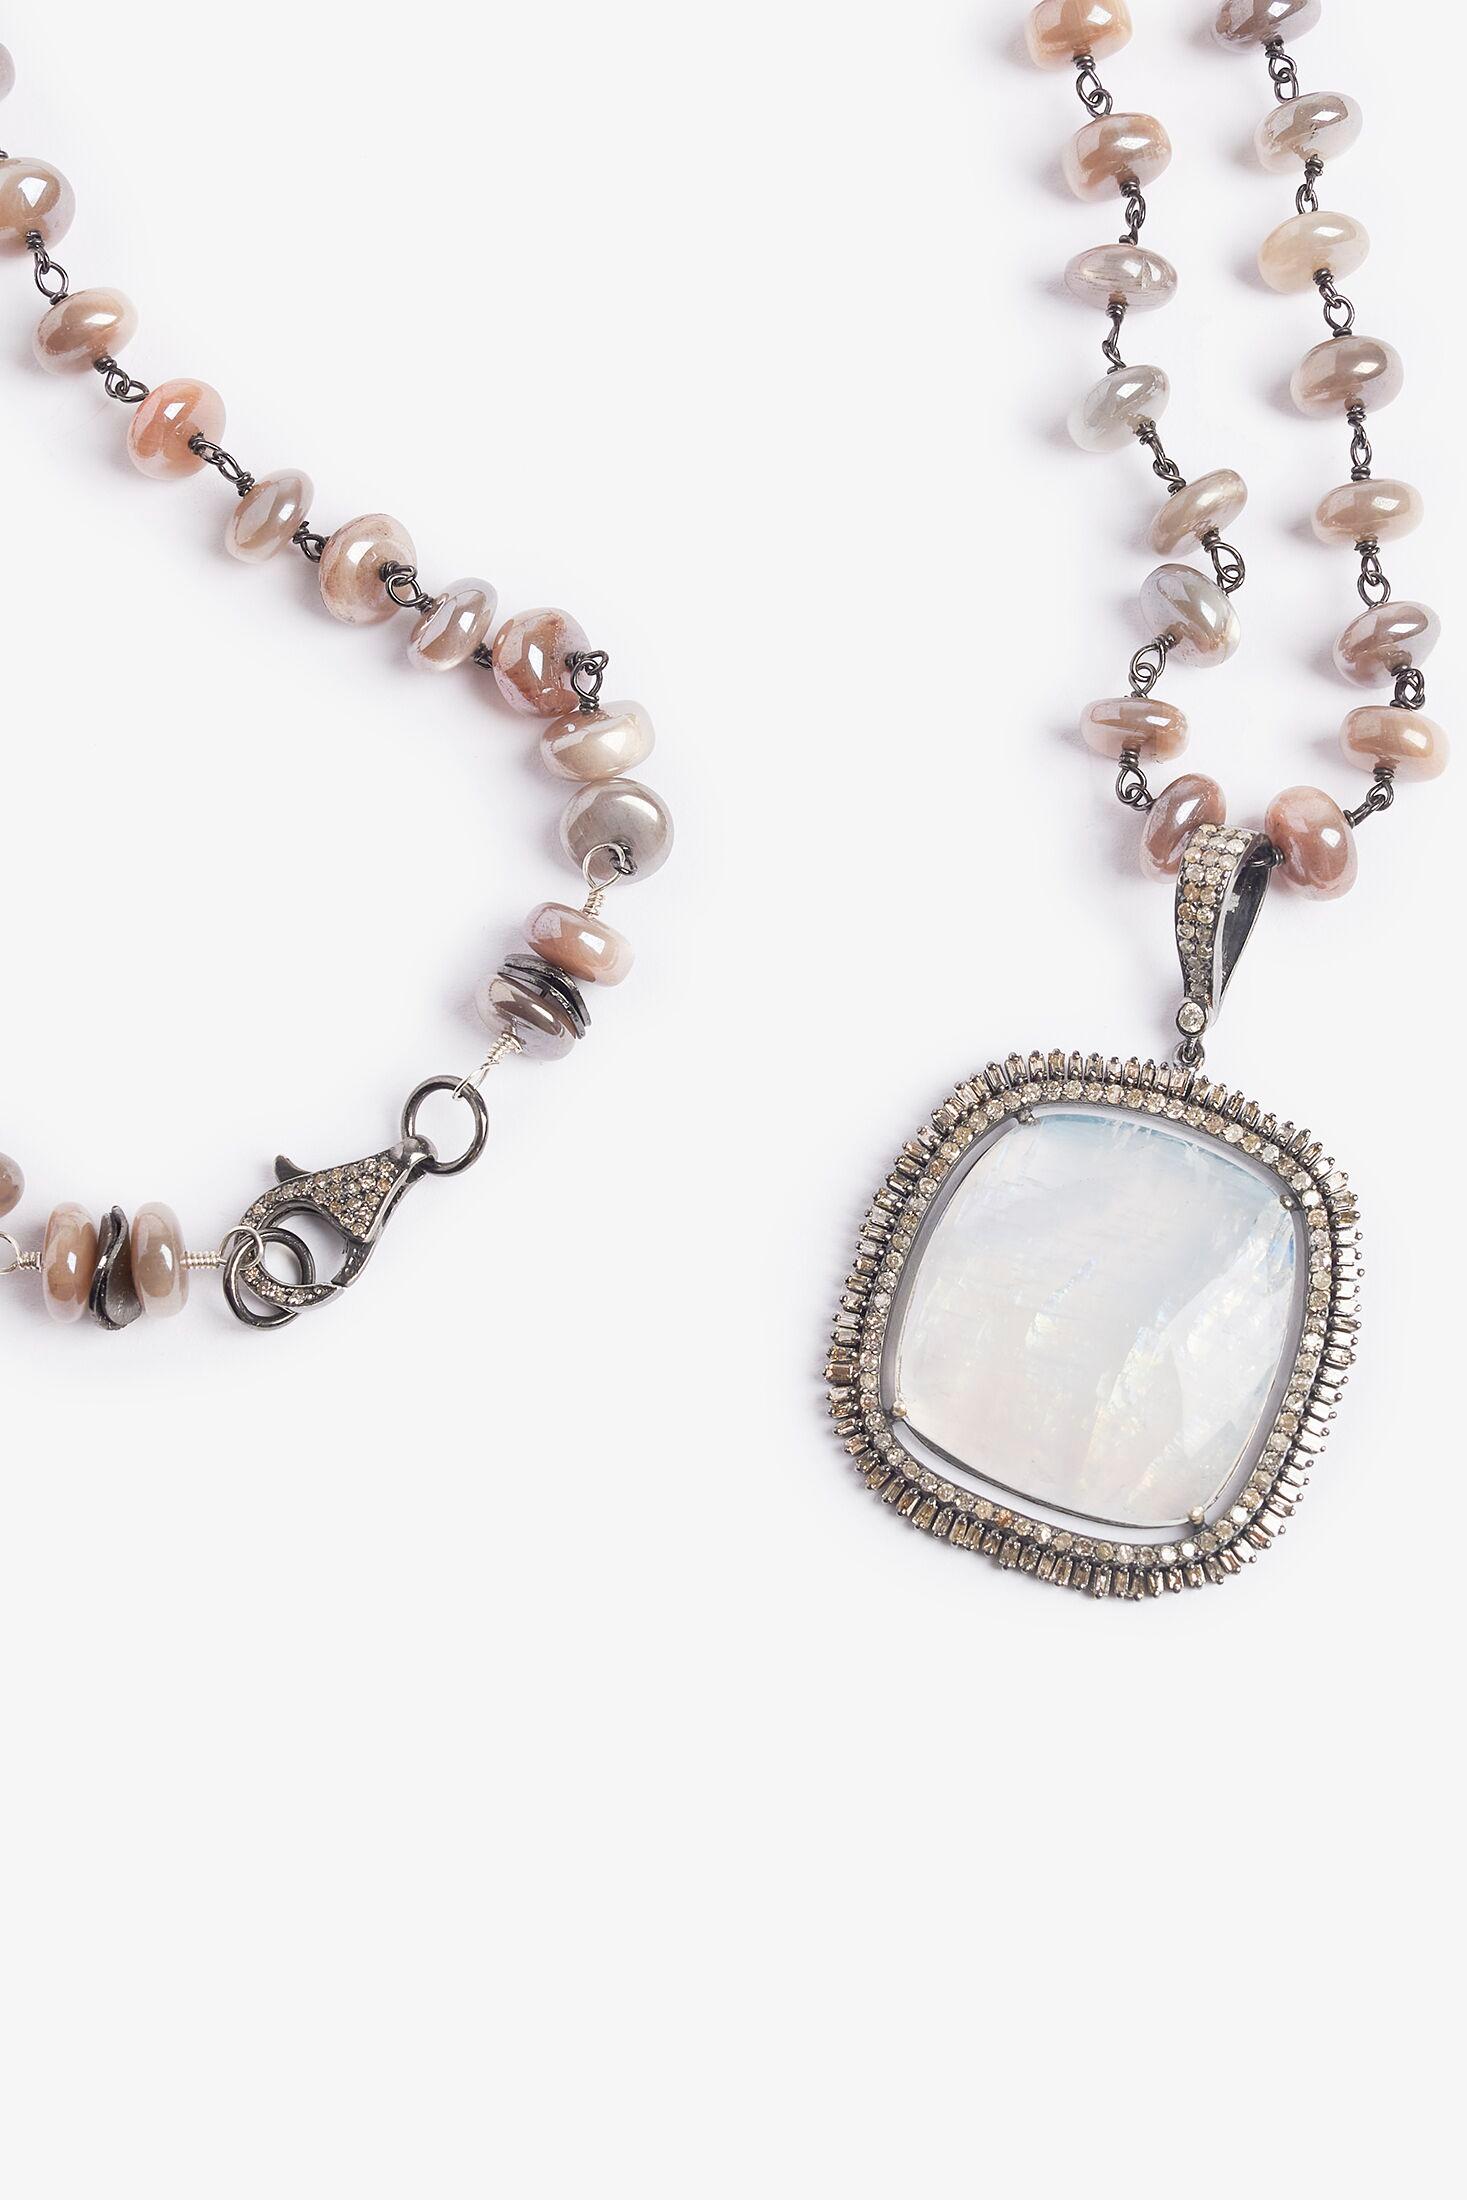 Story Behind the Jewelry
Love takes you to the moon and back just like this unique one-of-a-kind necklace.  The beautiful moonstone pendant has hues of the rainbow and encased in pave diamonds.  The necklace is adorned with iridescent moonstone and